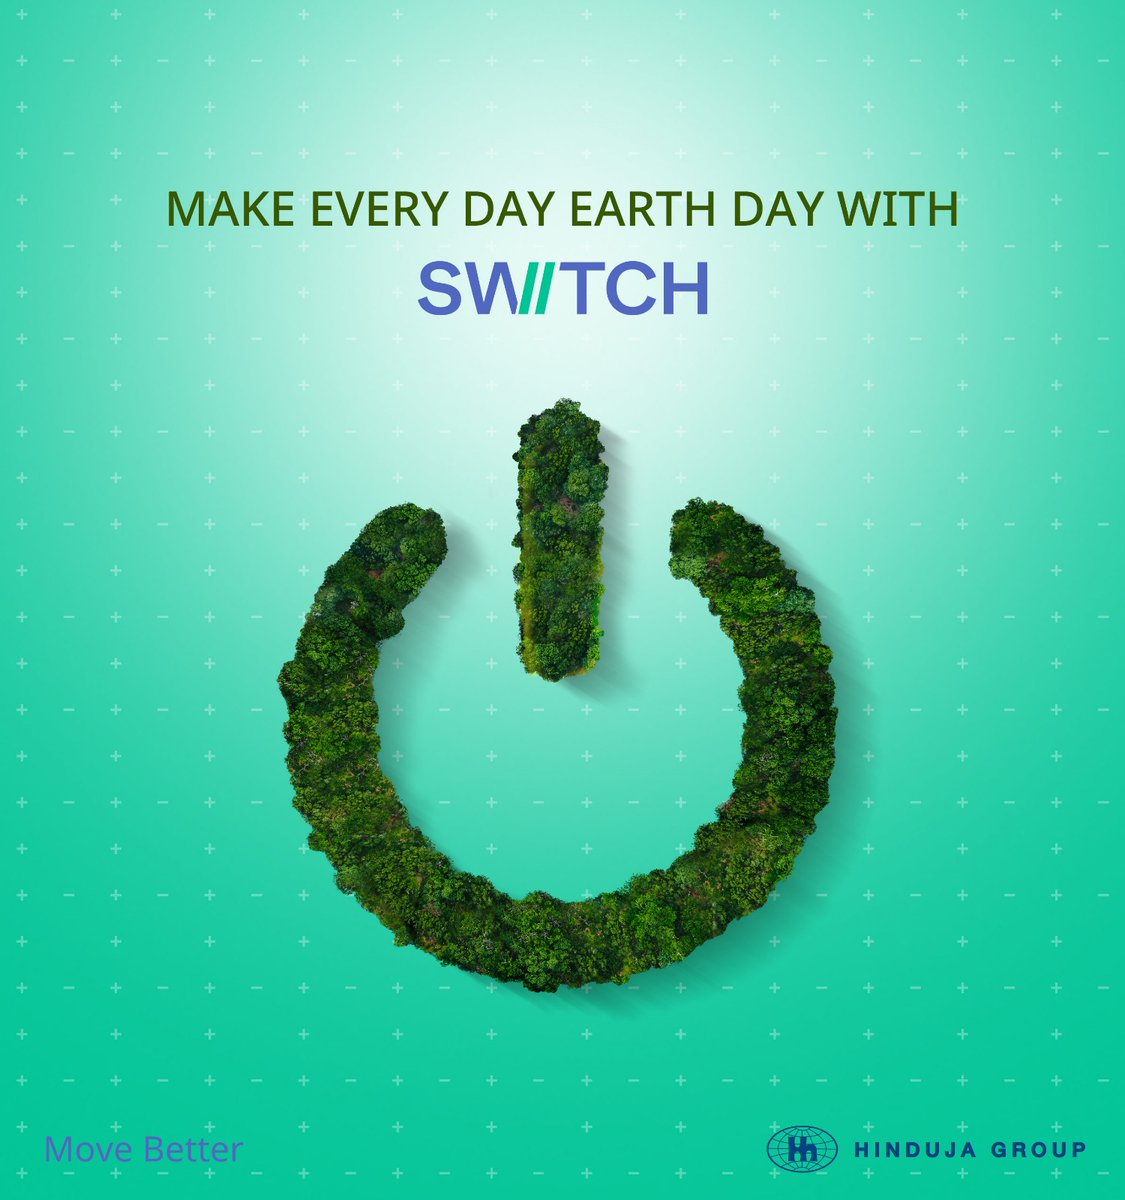 Silent, efficient, and emission-free. On this Earth Day, let's celebrate the harmony between nature and technology as electric vehicles pave the way for a cleaner, greener future. #SwitchMobility #ElectricVehicles #MoveBetter #EcoFriendly #ZeroEmissions #FutureOfMobility